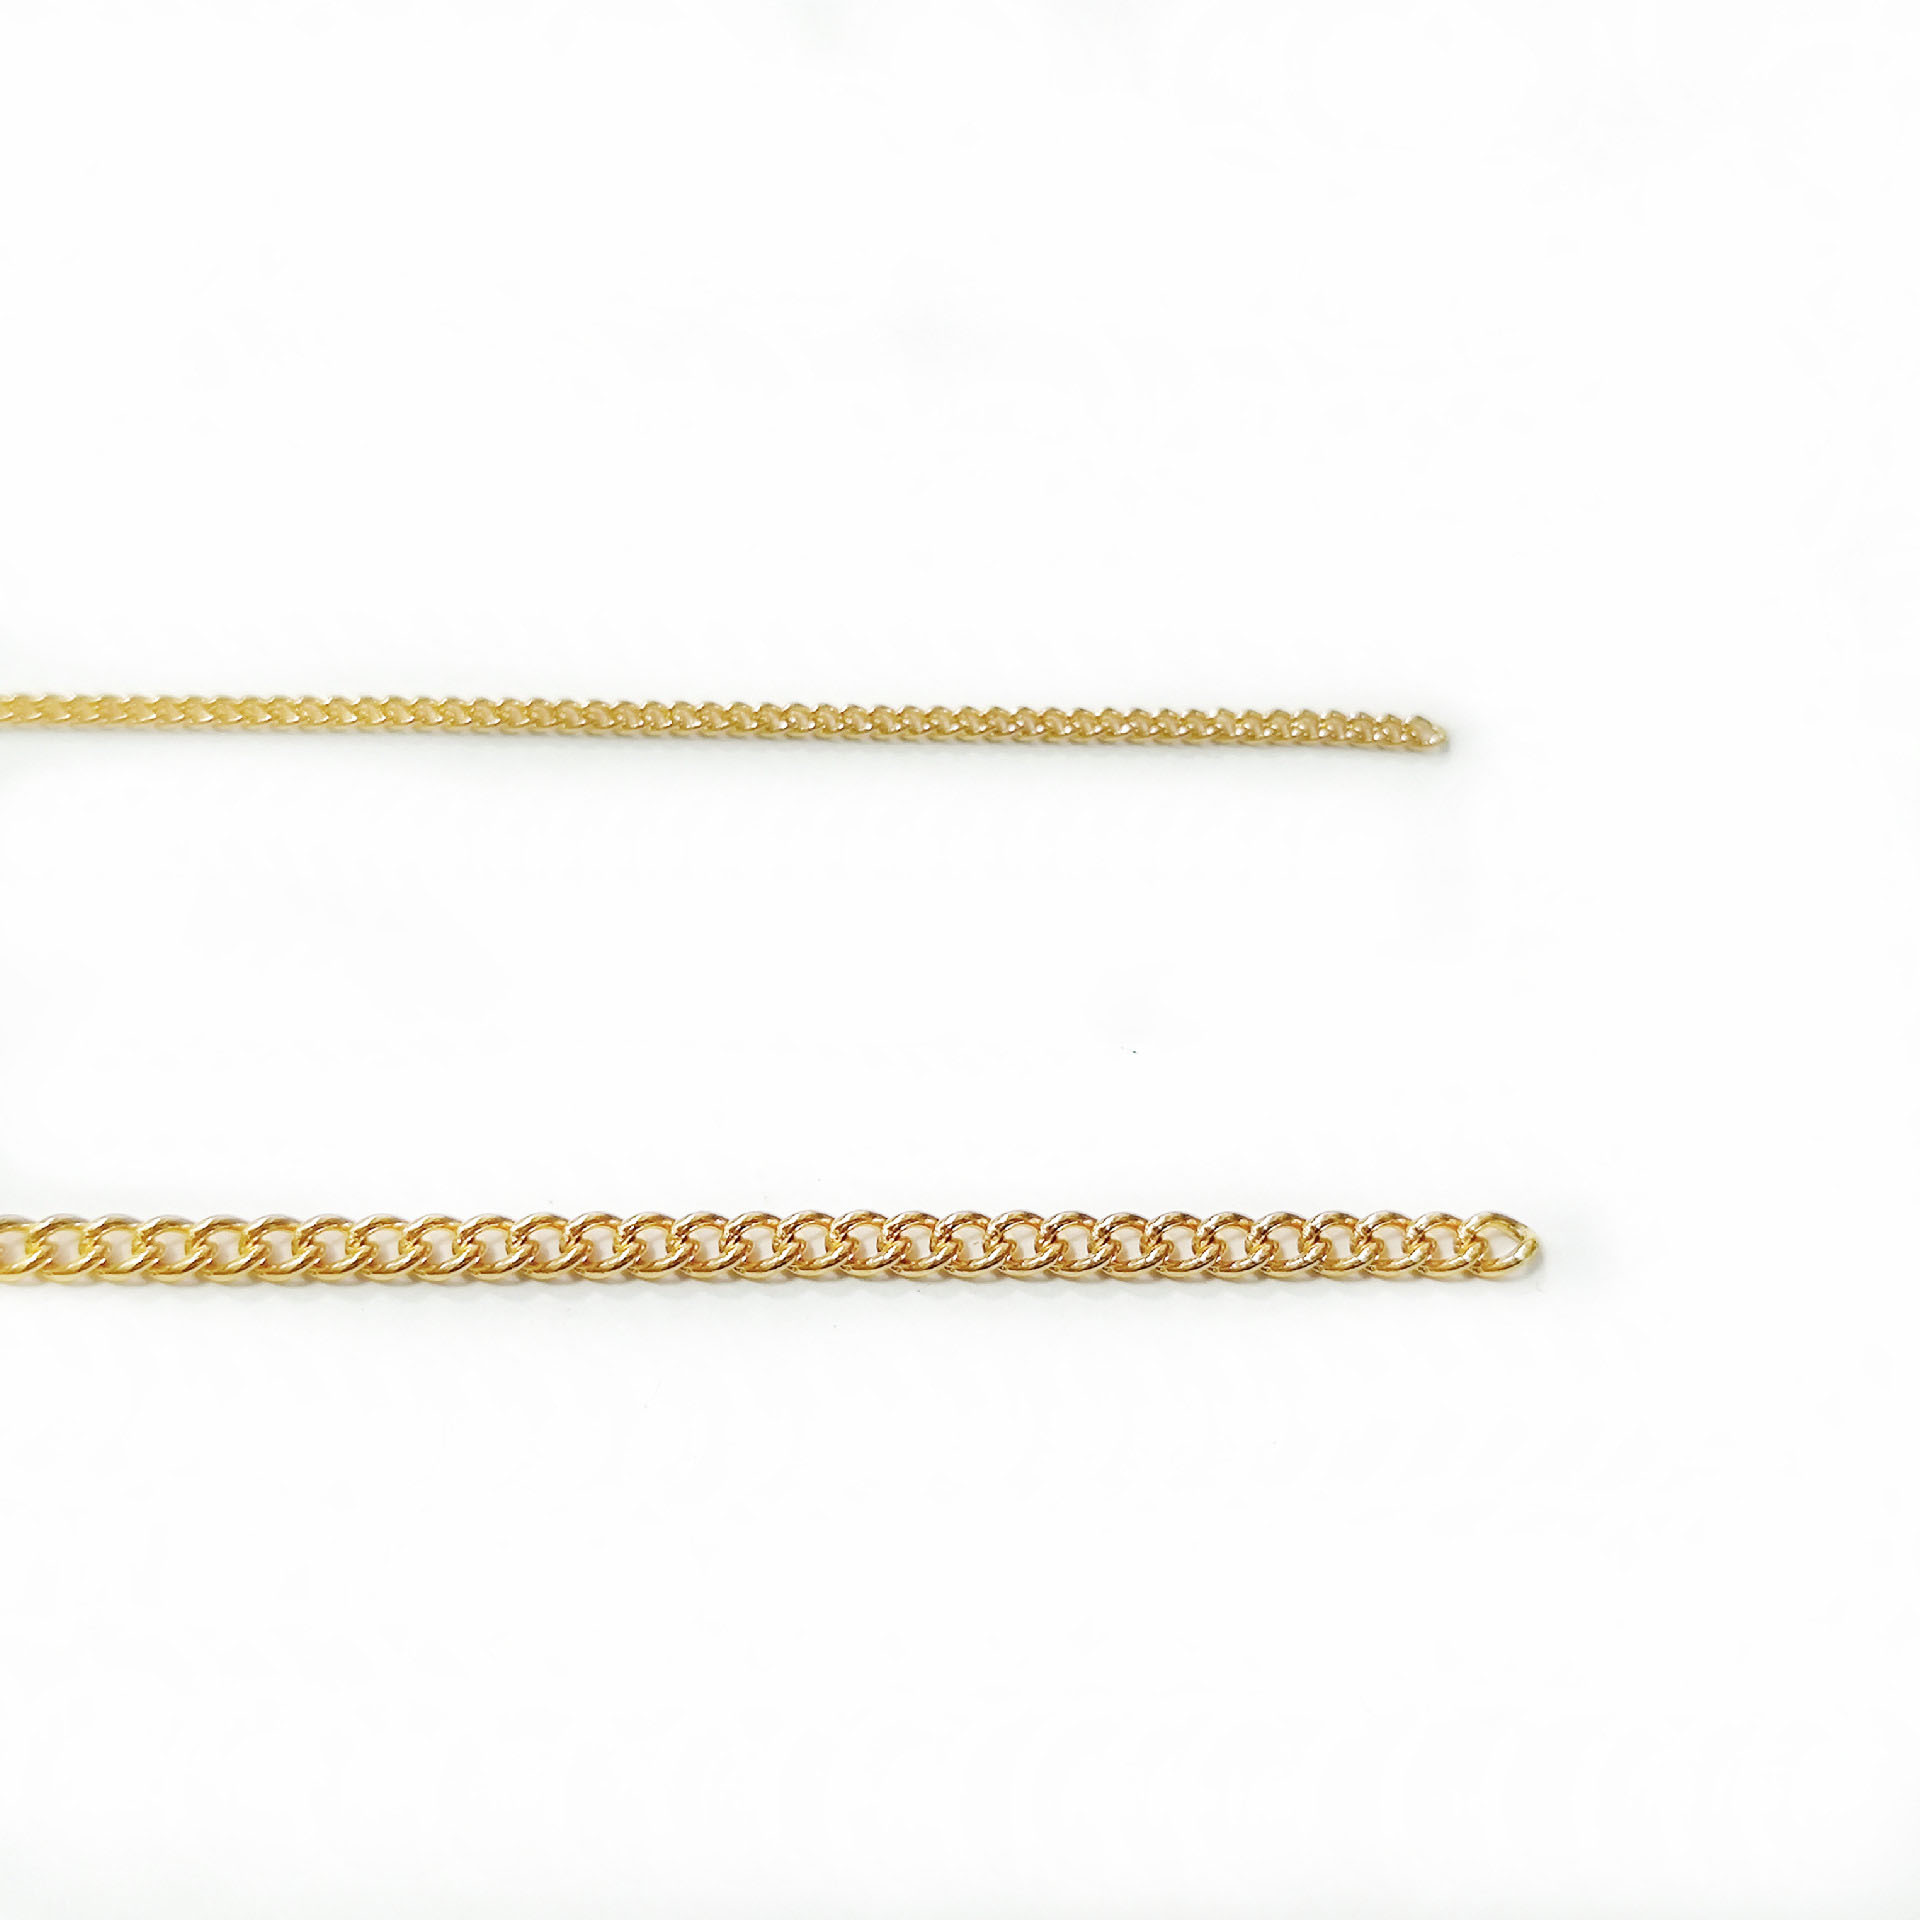 0.5 line*chain width 2.0mm gold